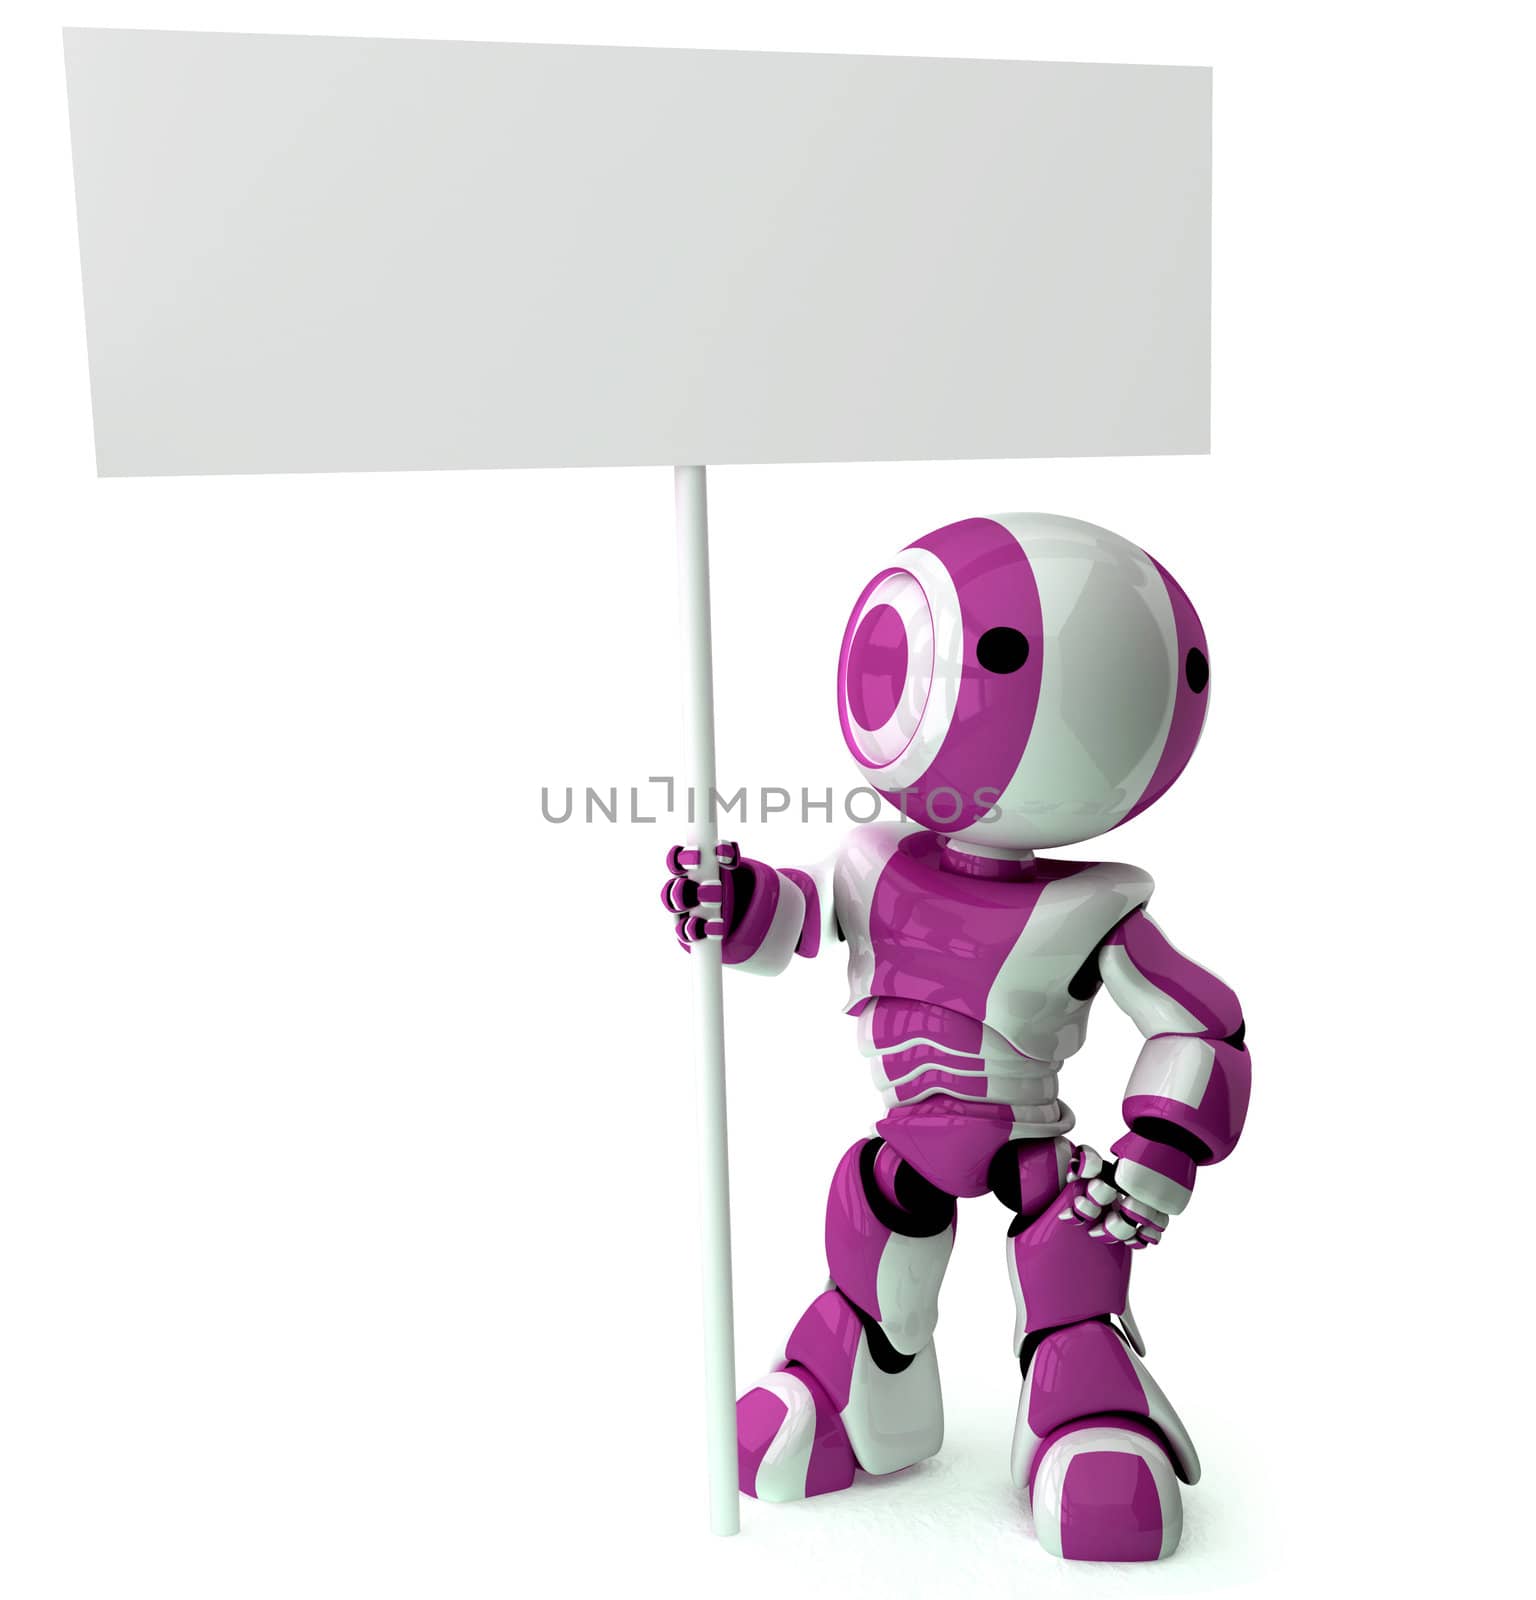 Glossy Pinkish Robot Standing Holding Sign by LeoBlanchette